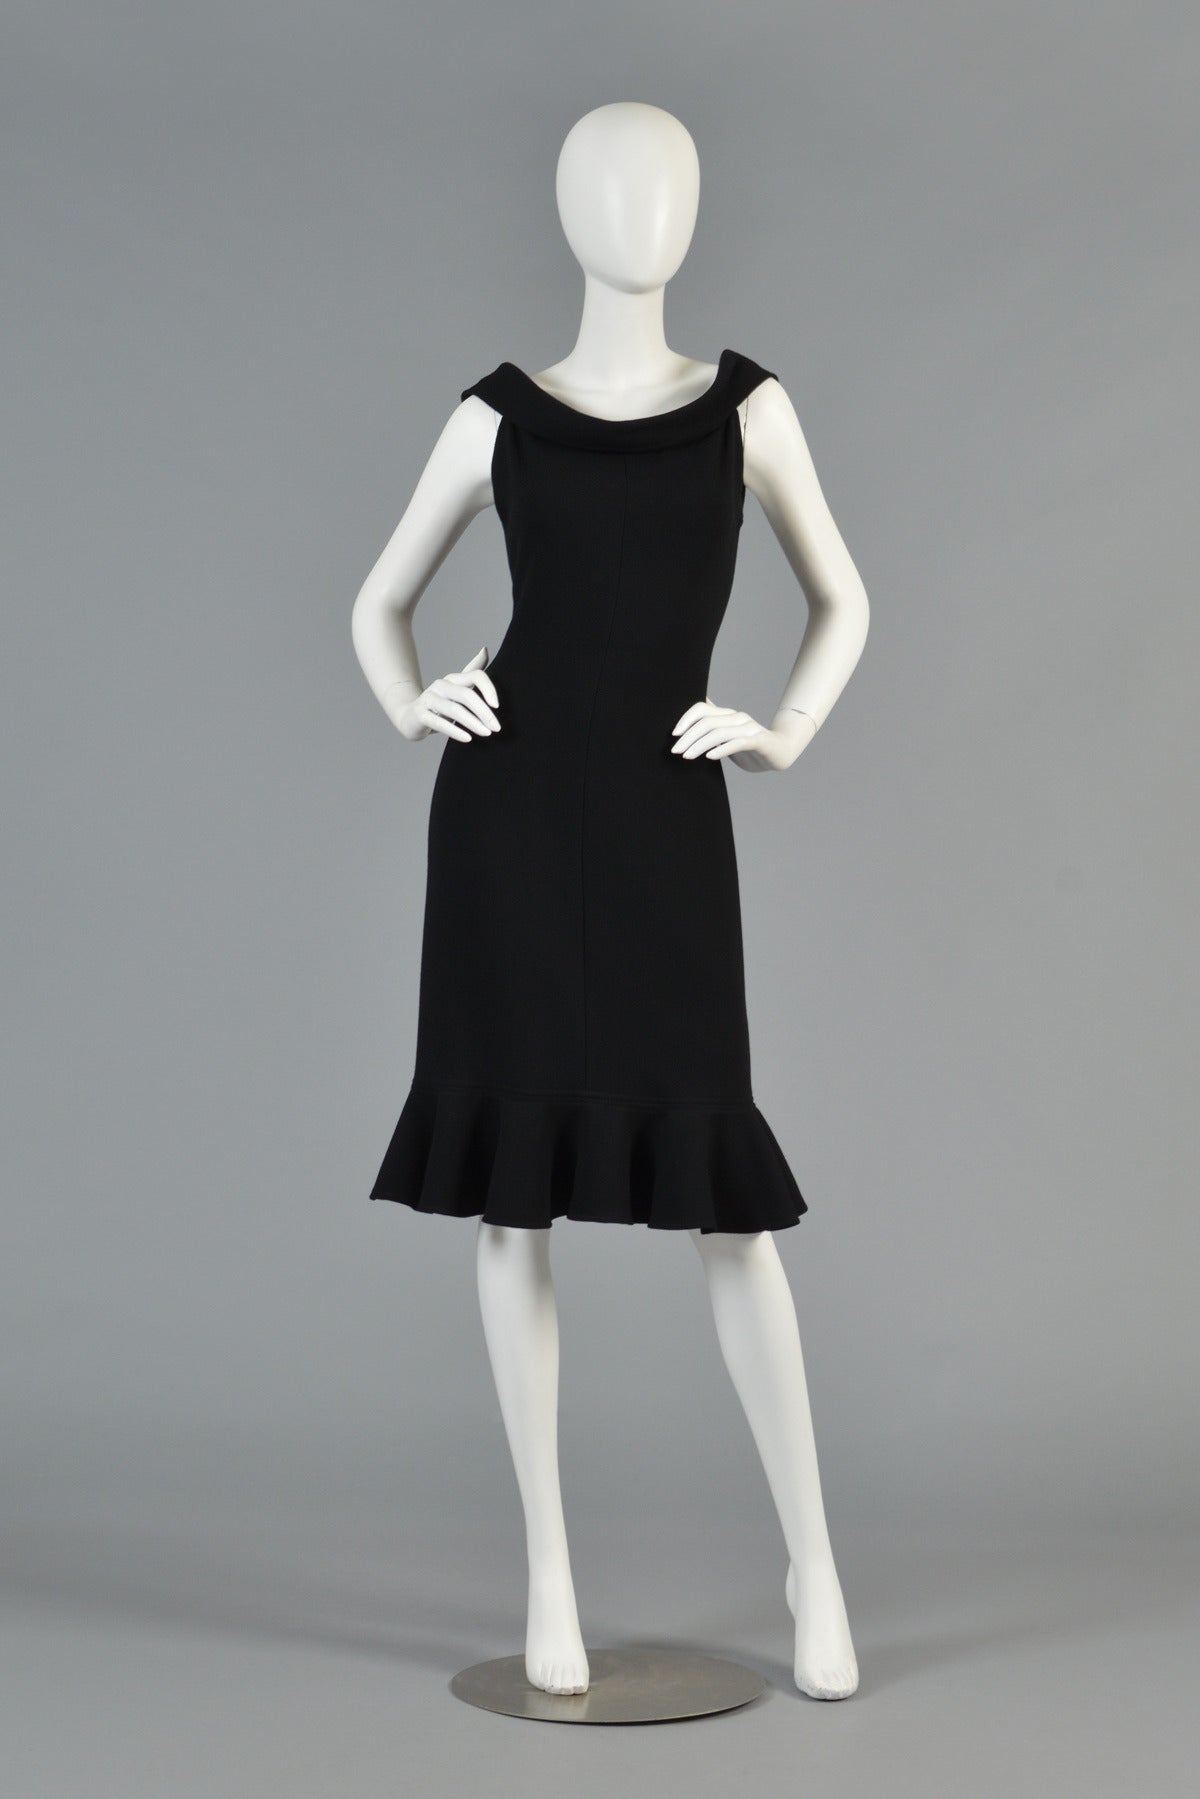 Killer 1980s LBD by Oscar de la Renta. Super fitted + sleek, this dress hugs all the right places. 

It's hard to tell from the photos but this dress features an amazing wide cut sculpted, standing neckline that scoops in the back with hanging